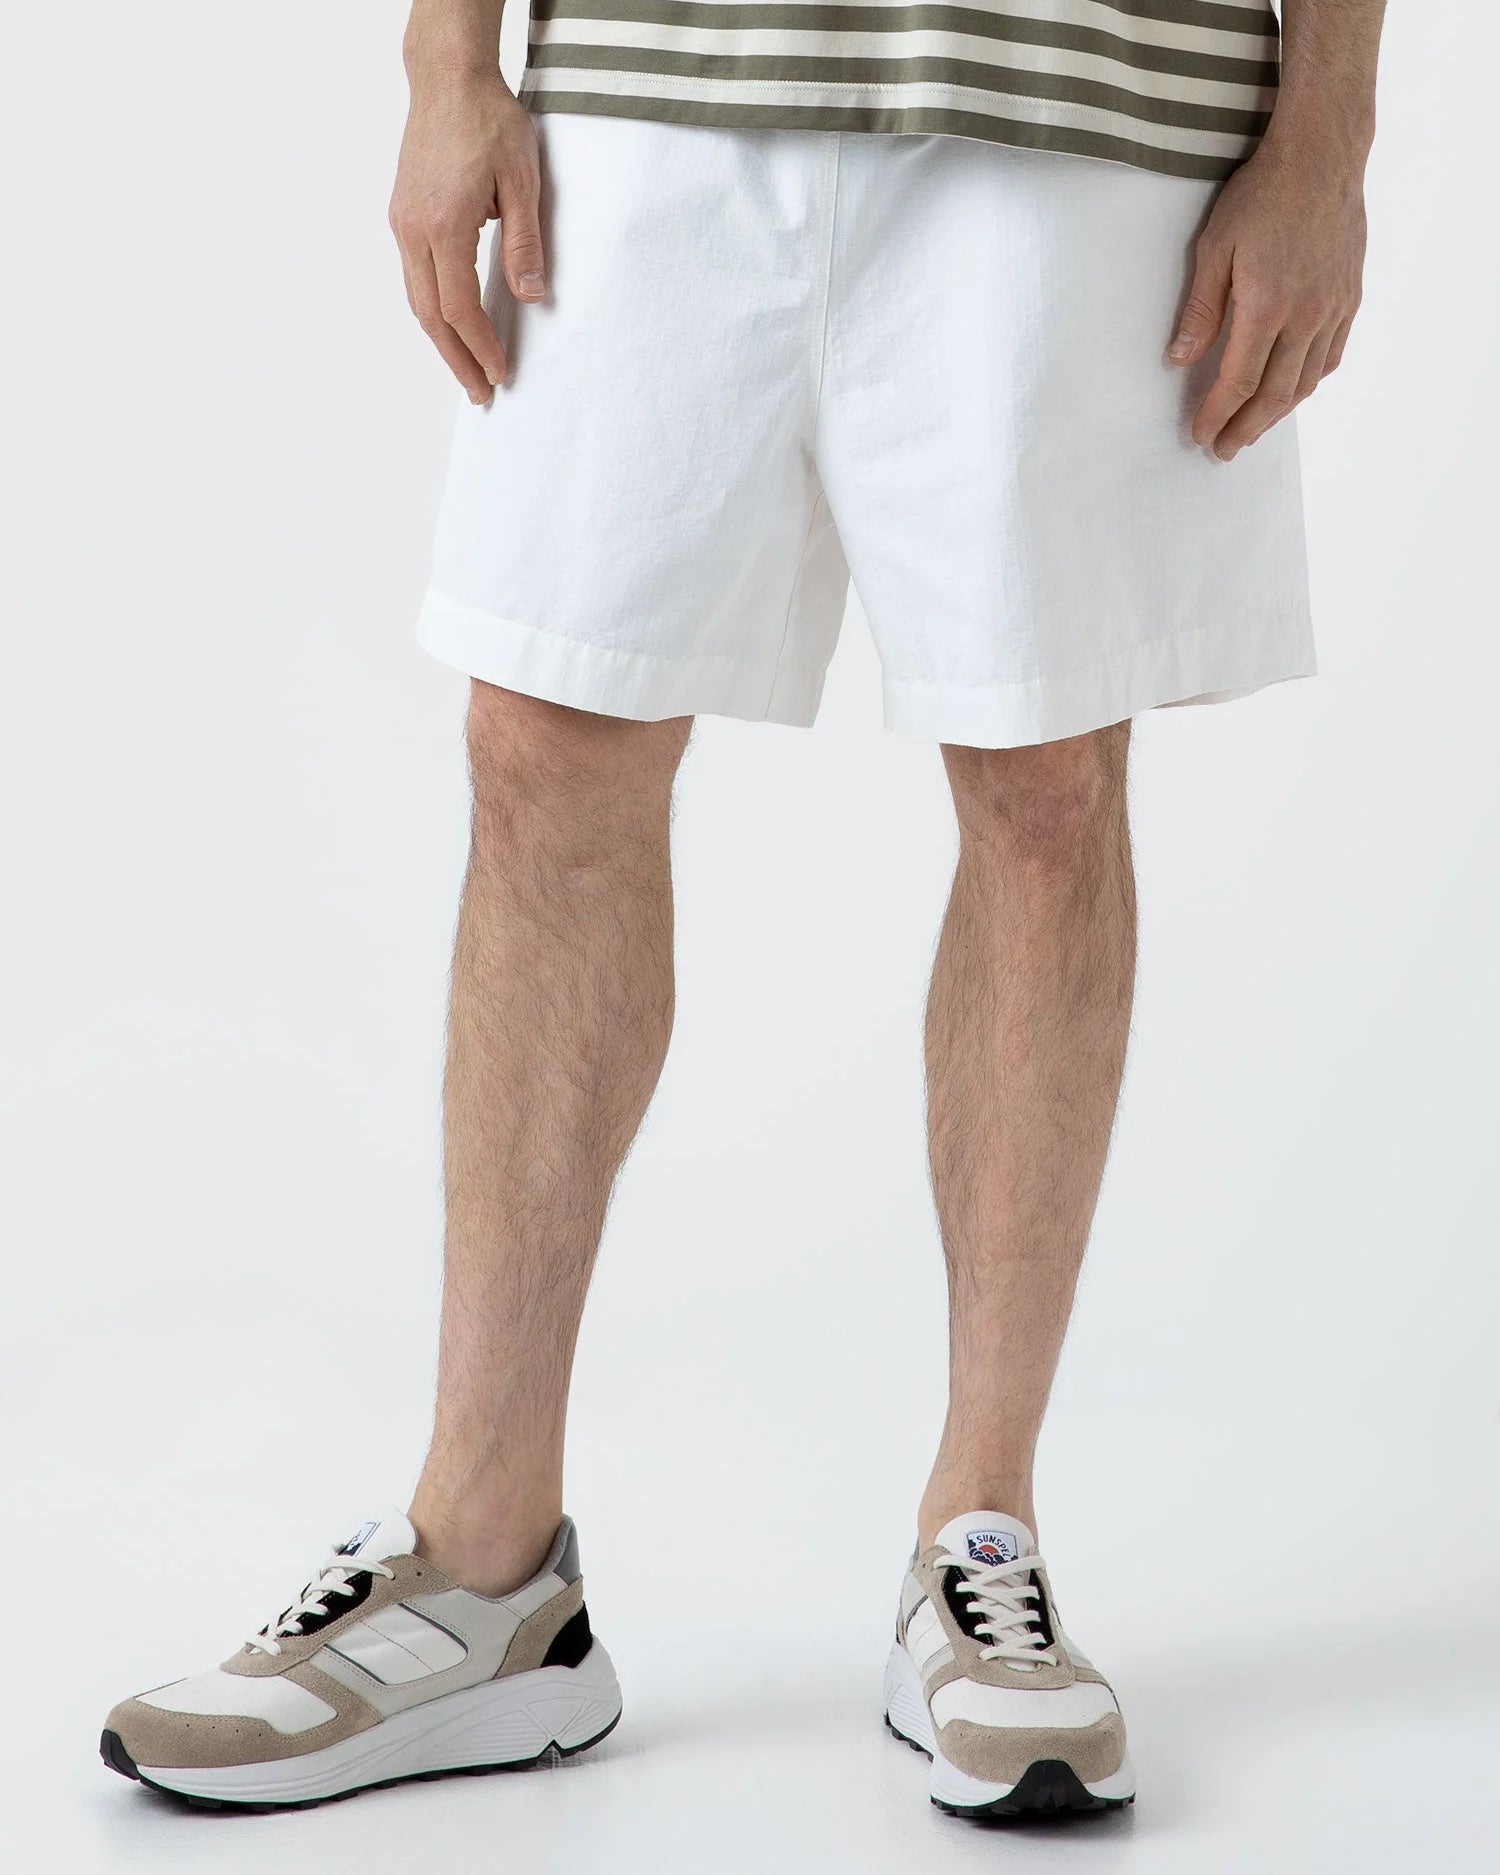 Sunspel x Nigel Cabourn Ripstop Army Short - Off White